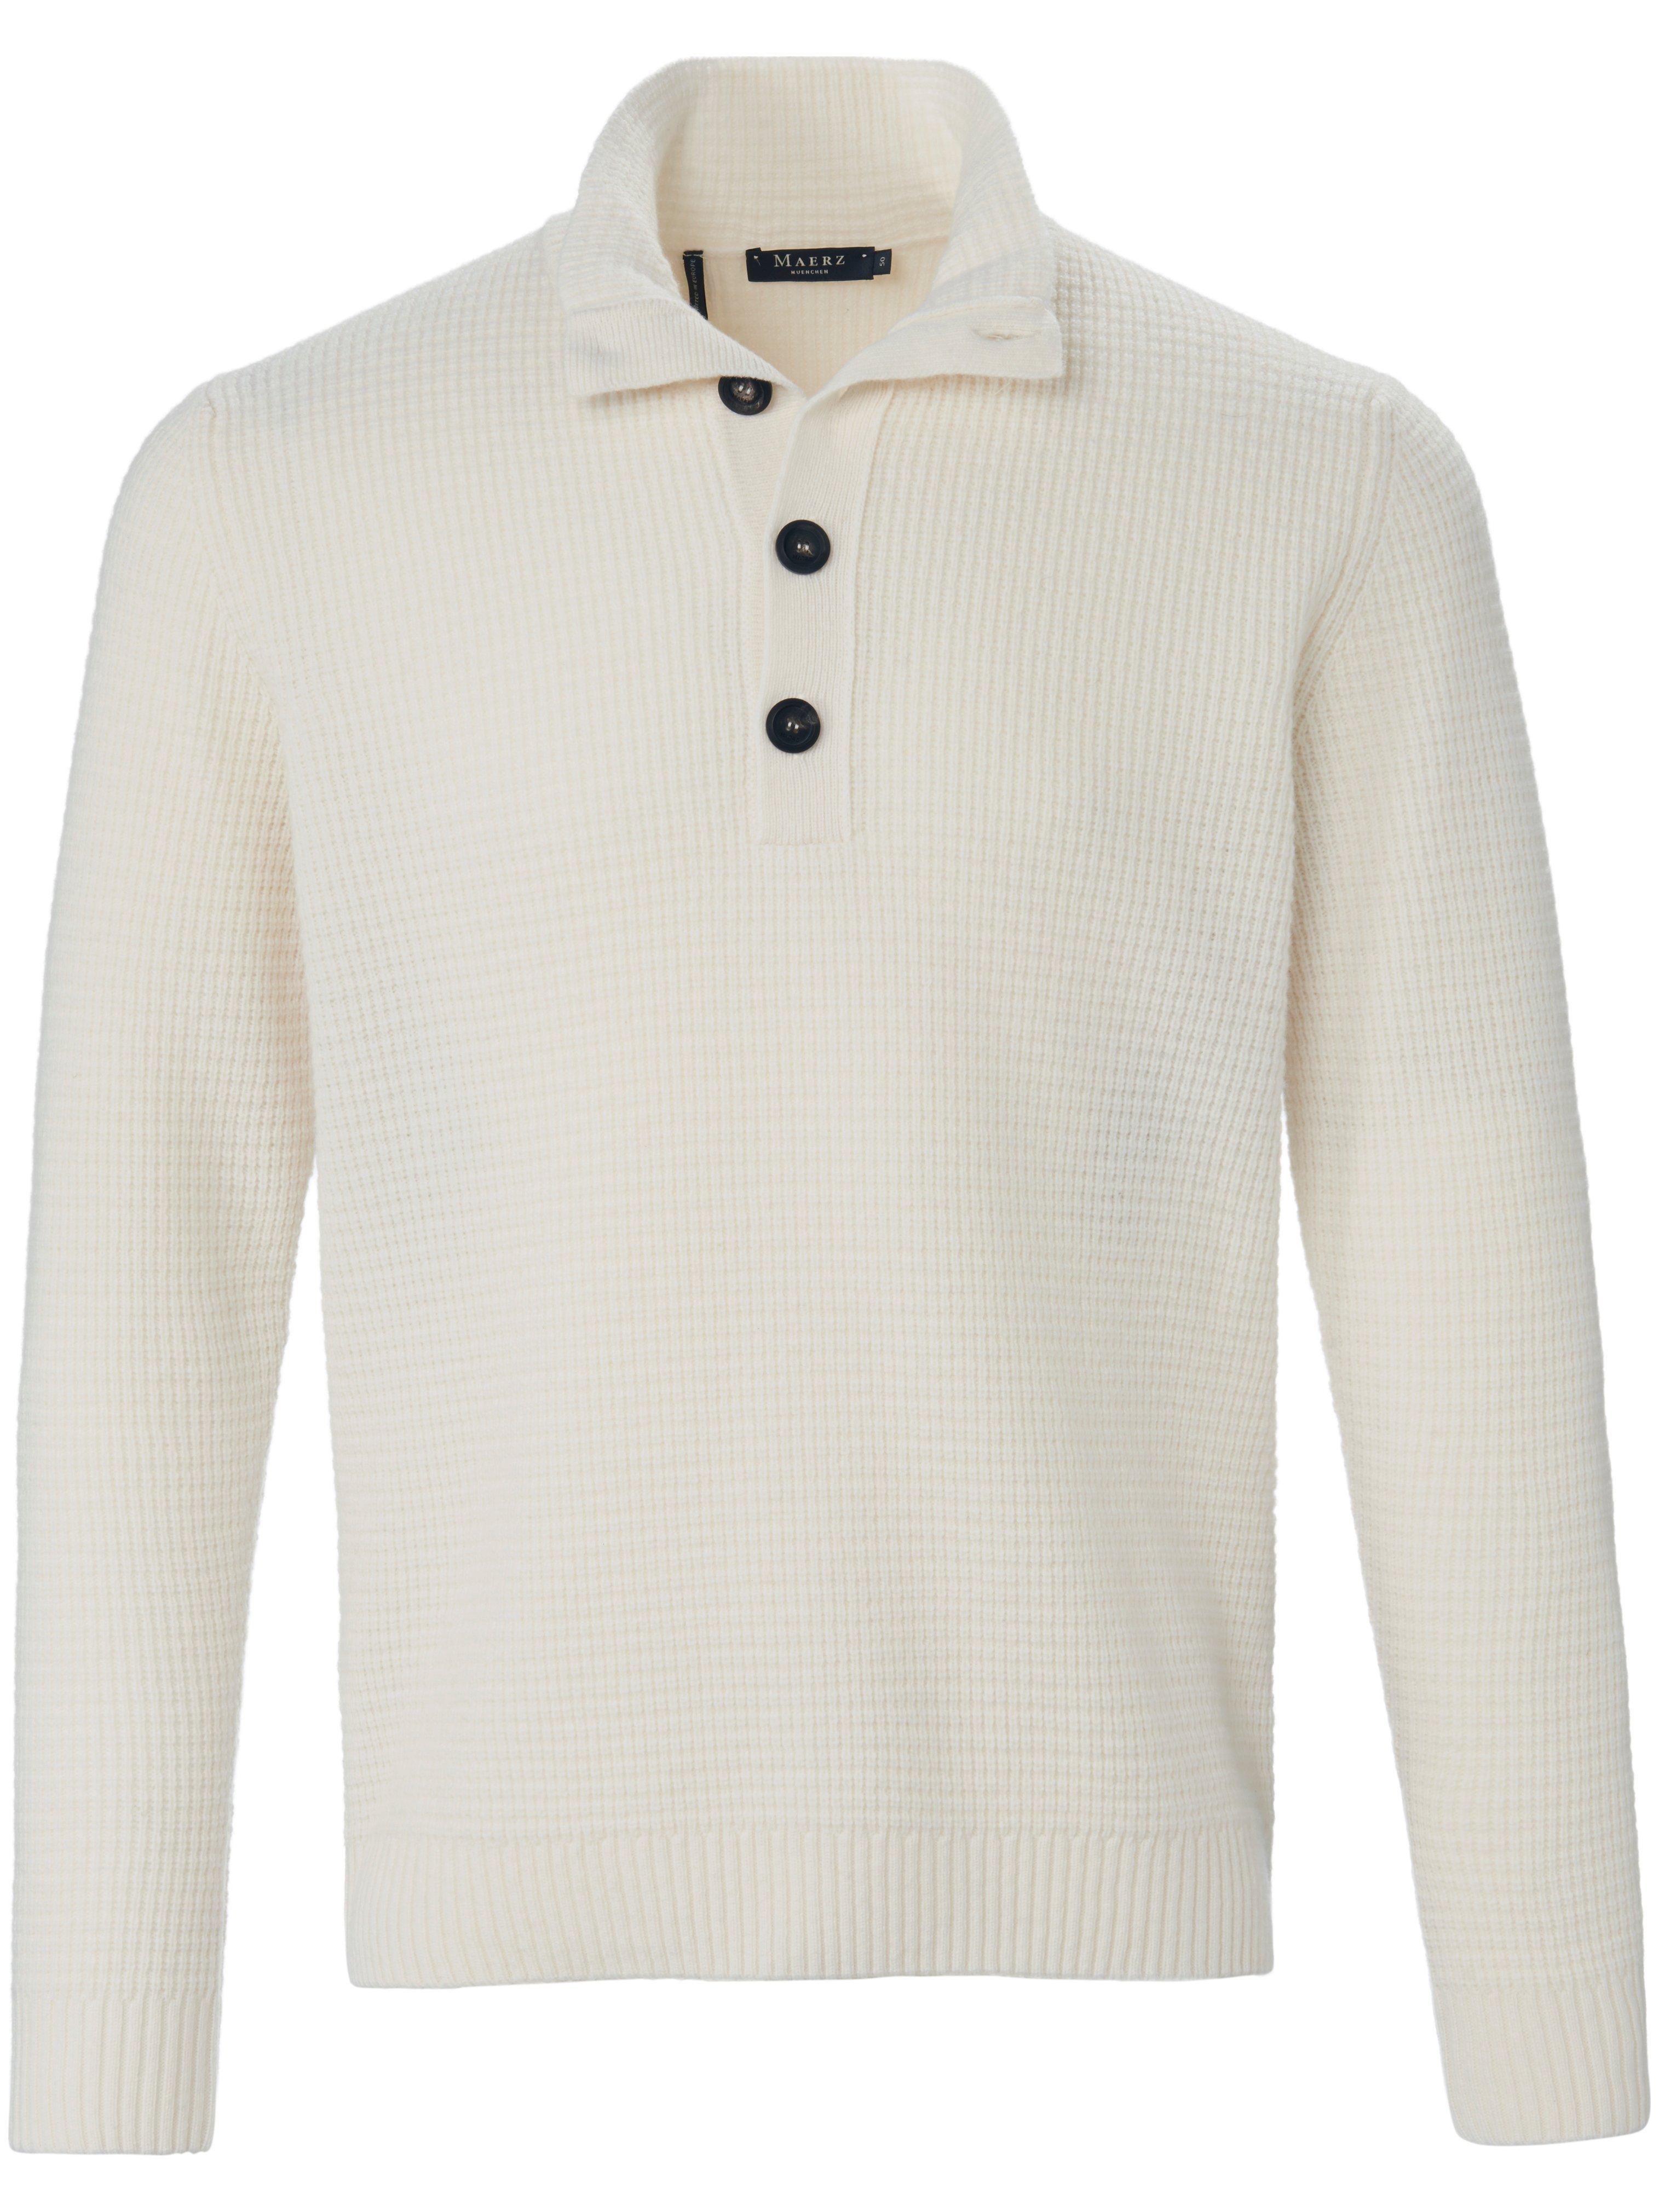 Le pull  MAERZ Muenchen beige